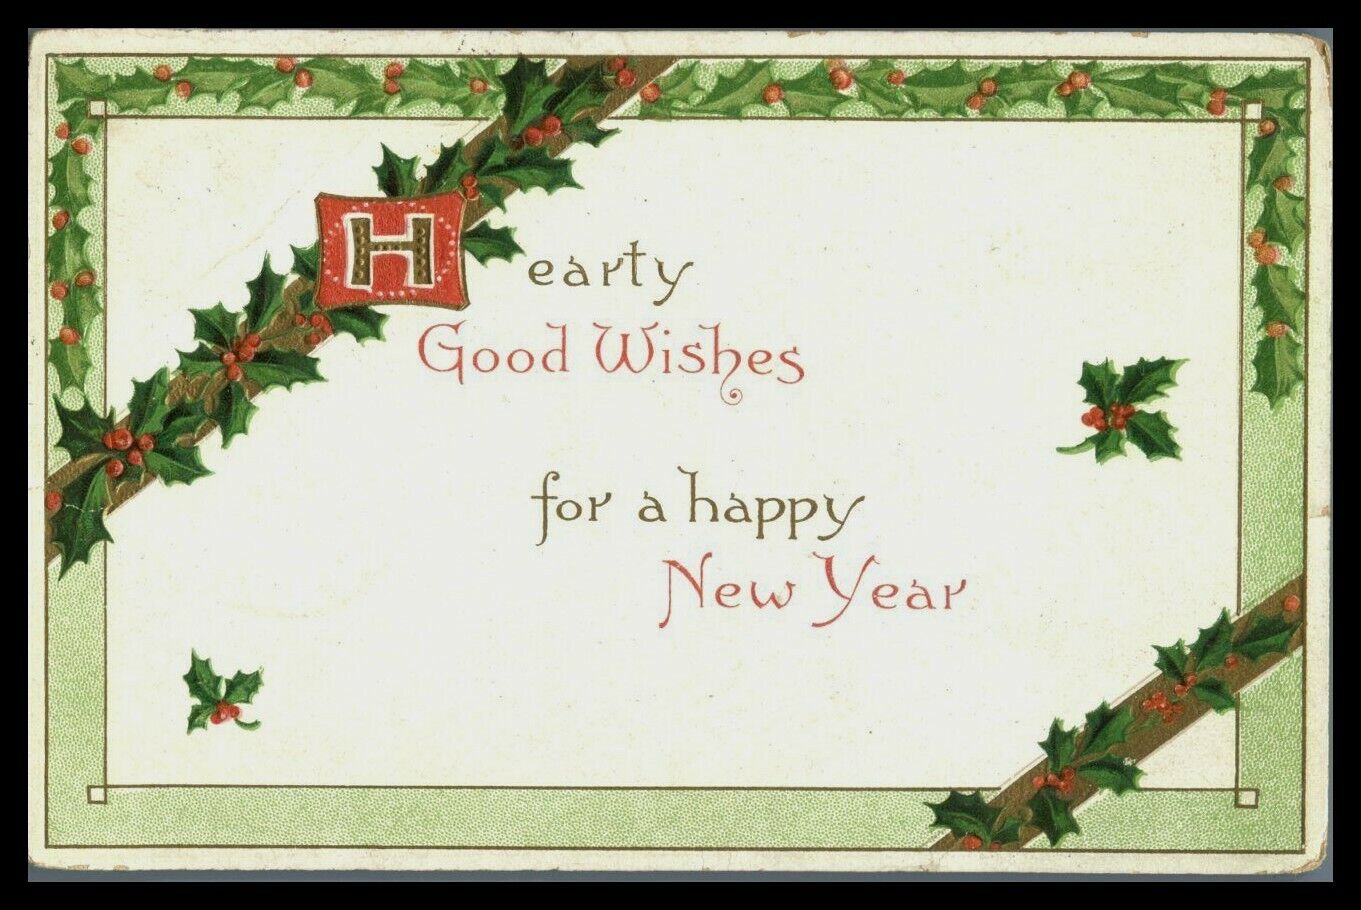 1907 Hearty New Year Good Wishes Friendship Letter Embossed Antique Postcard